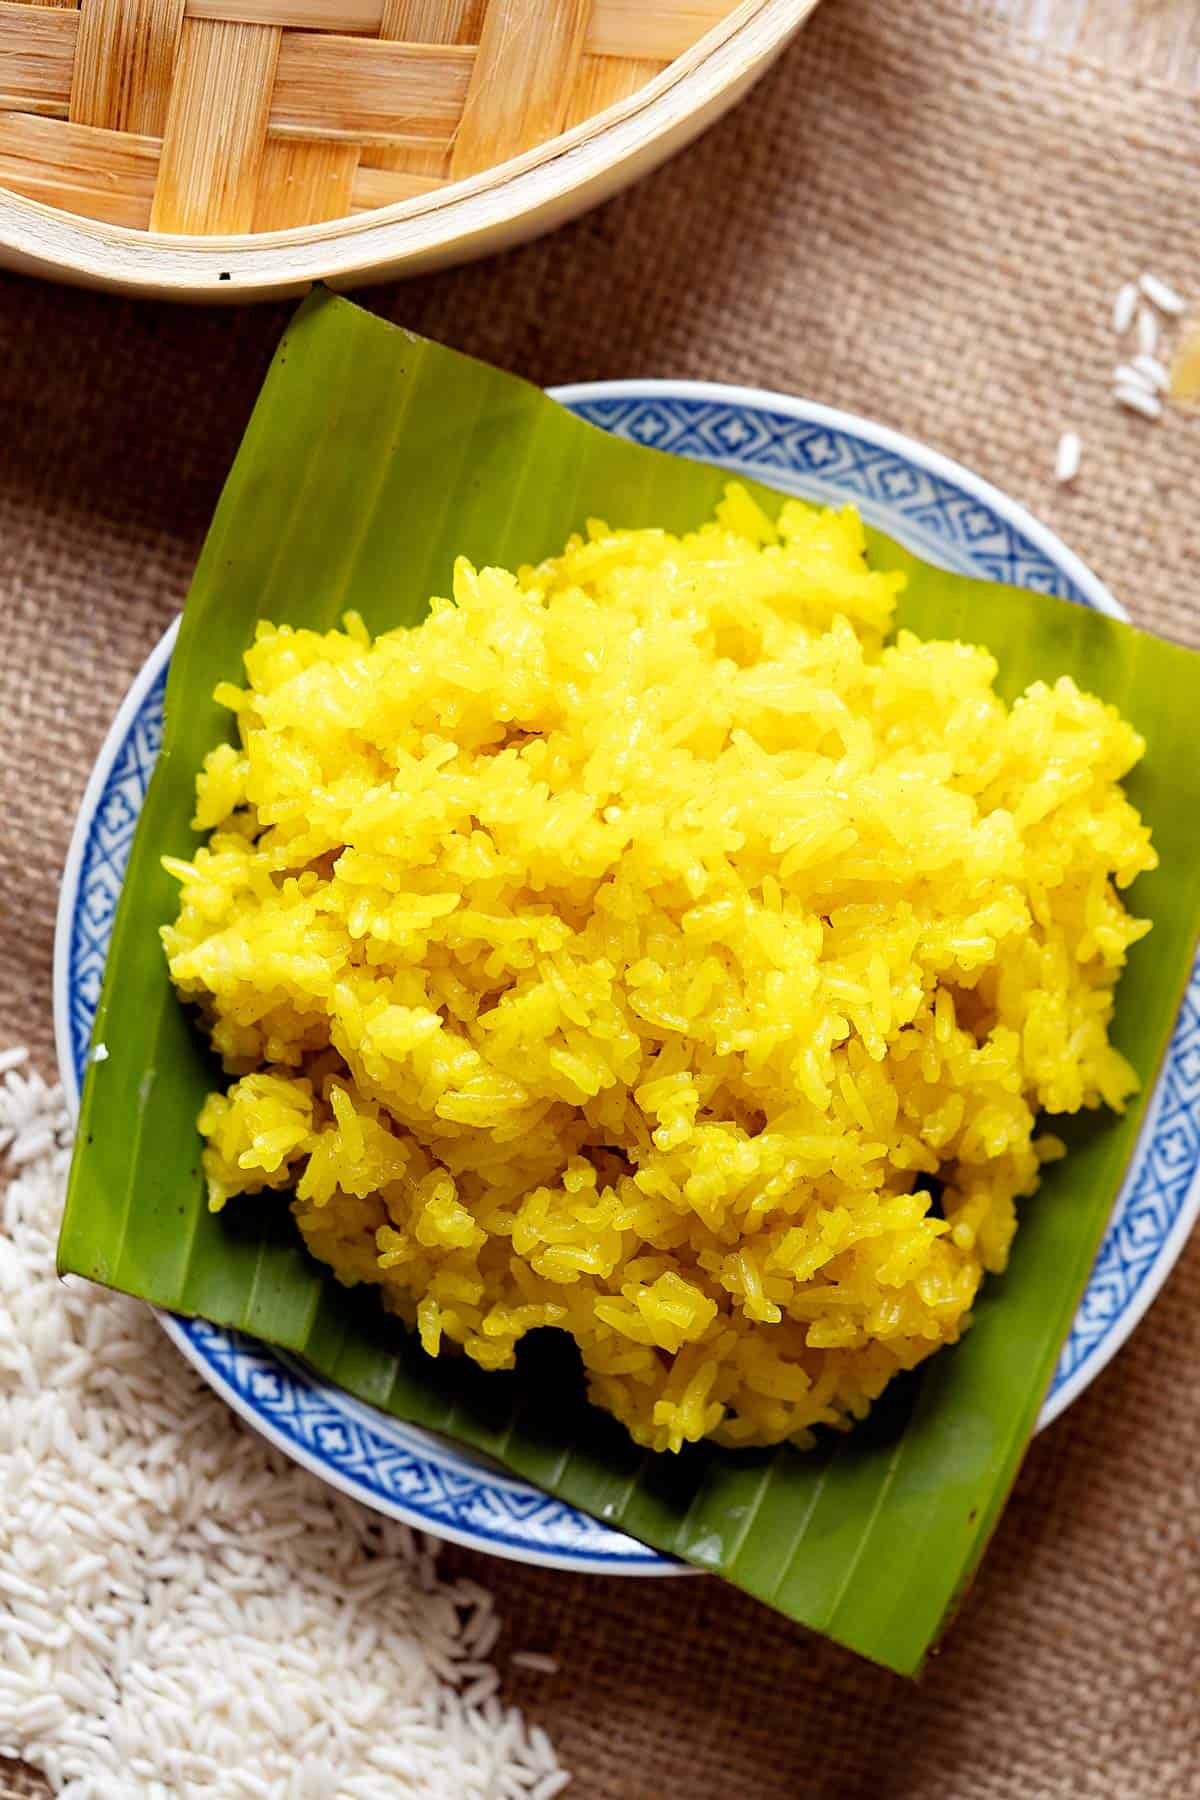 Steamed glutinous rice with turmeric and coconut milk in a plate